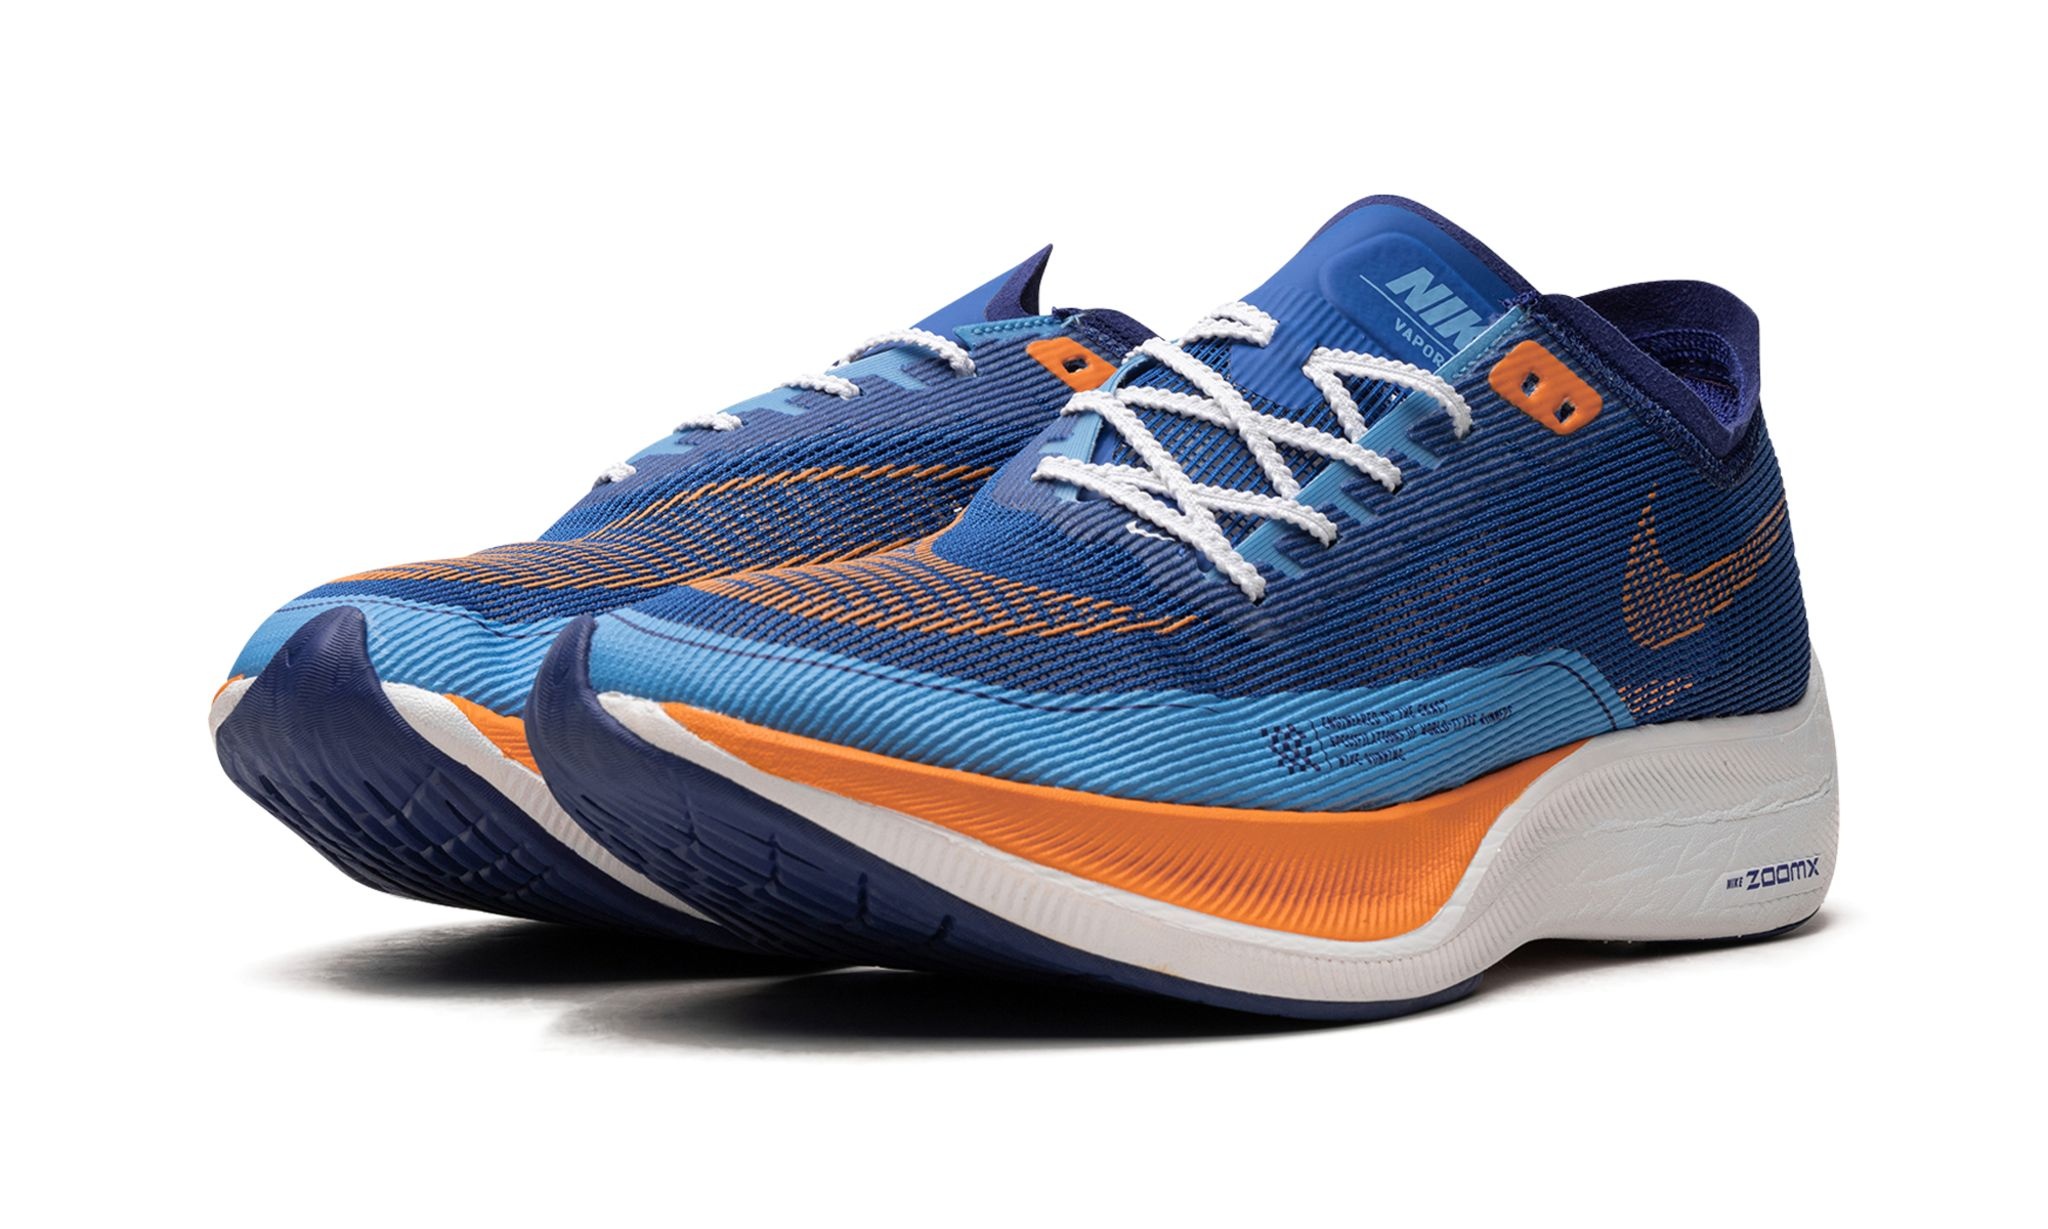 ZoomX Vaporfly Next% 2 "Game Royal" - 2